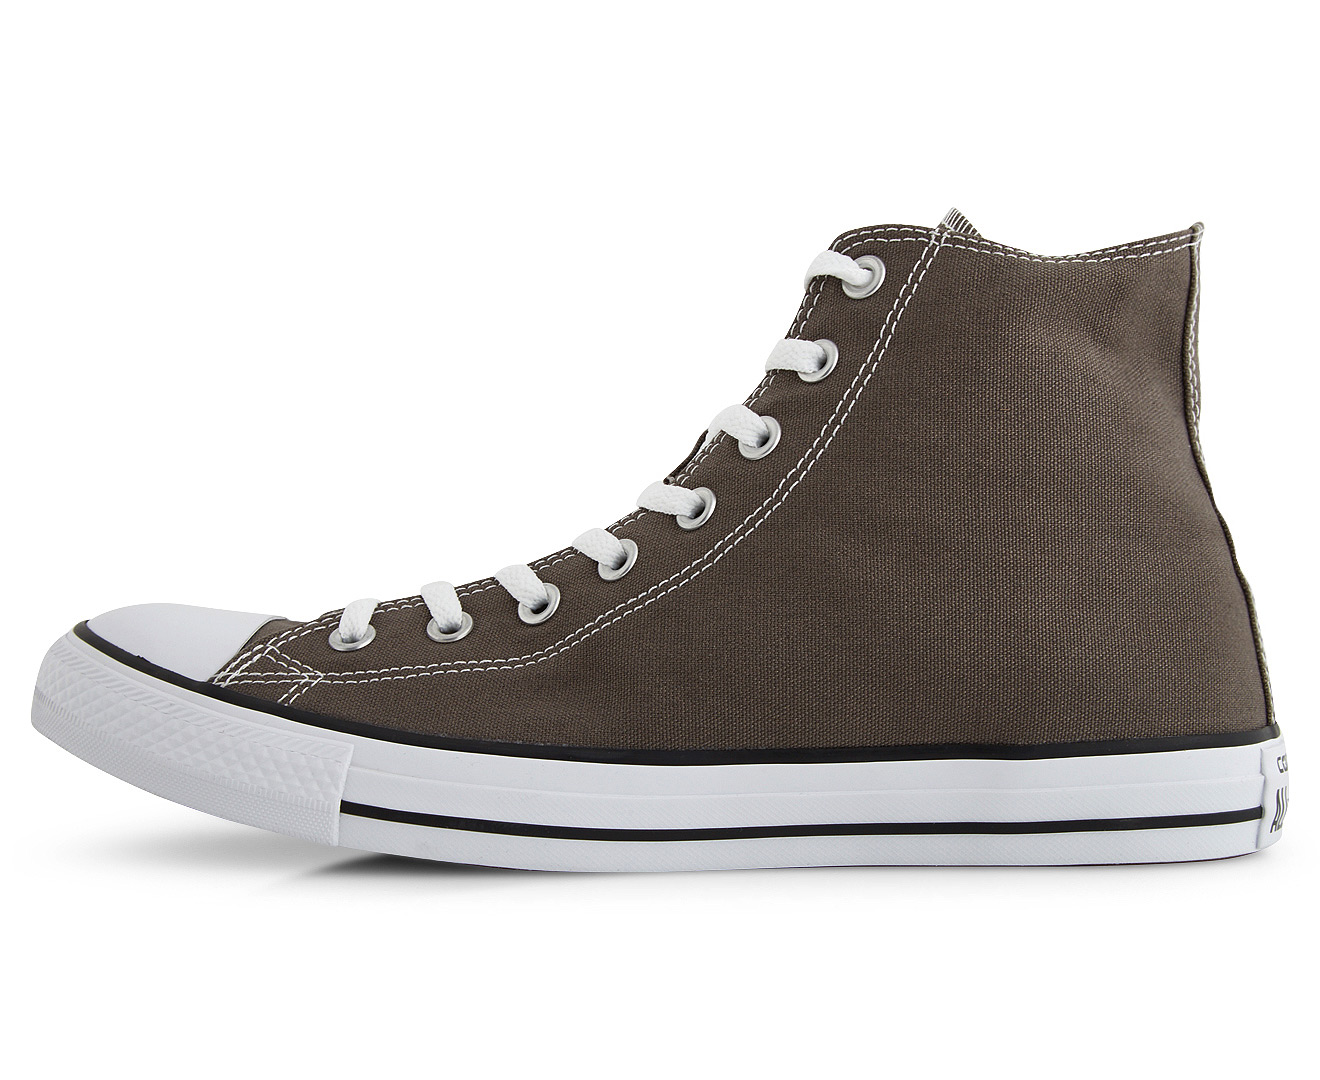 Converse Chuck Taylor Unisex All Star High Top Shoe - Charcoal | Catch ...